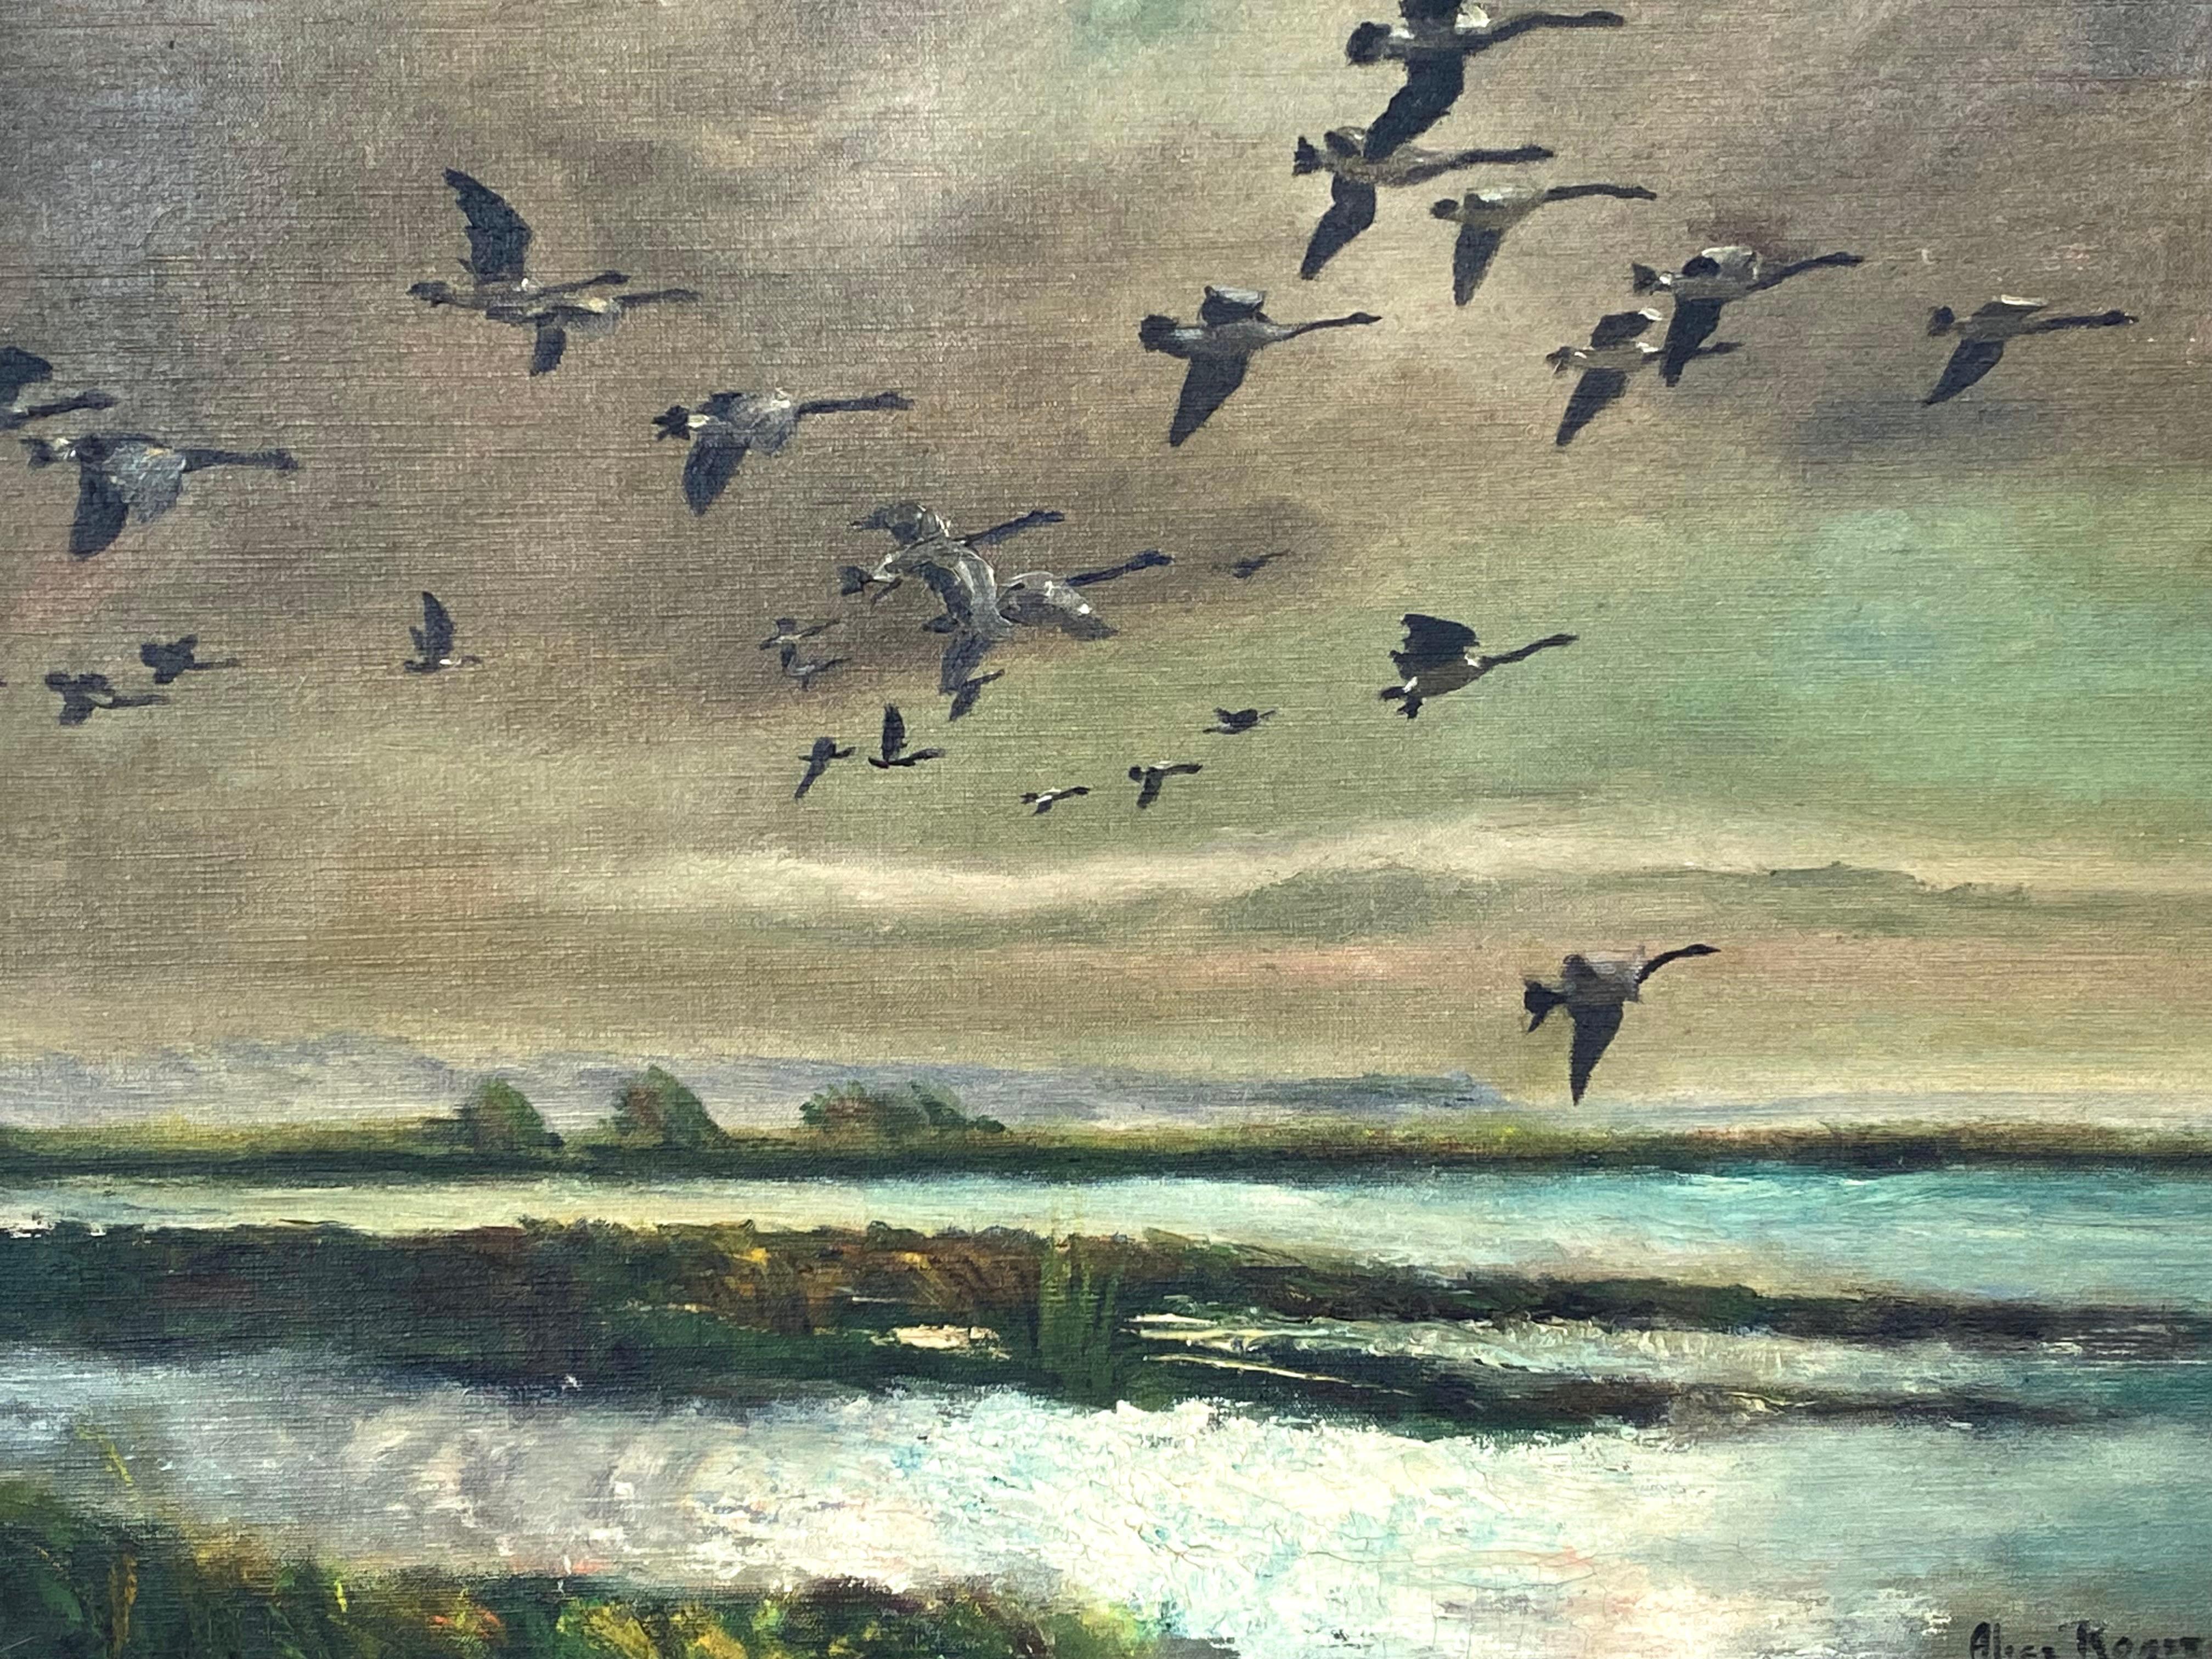 Original oil on canvas painting of Canadian geese flying south under a twilight sky.  Beautiful 
light reflection in the water below   Signed lower right and attributed to Alice Rogers (Young). Condition is very good, no issues. The painting is